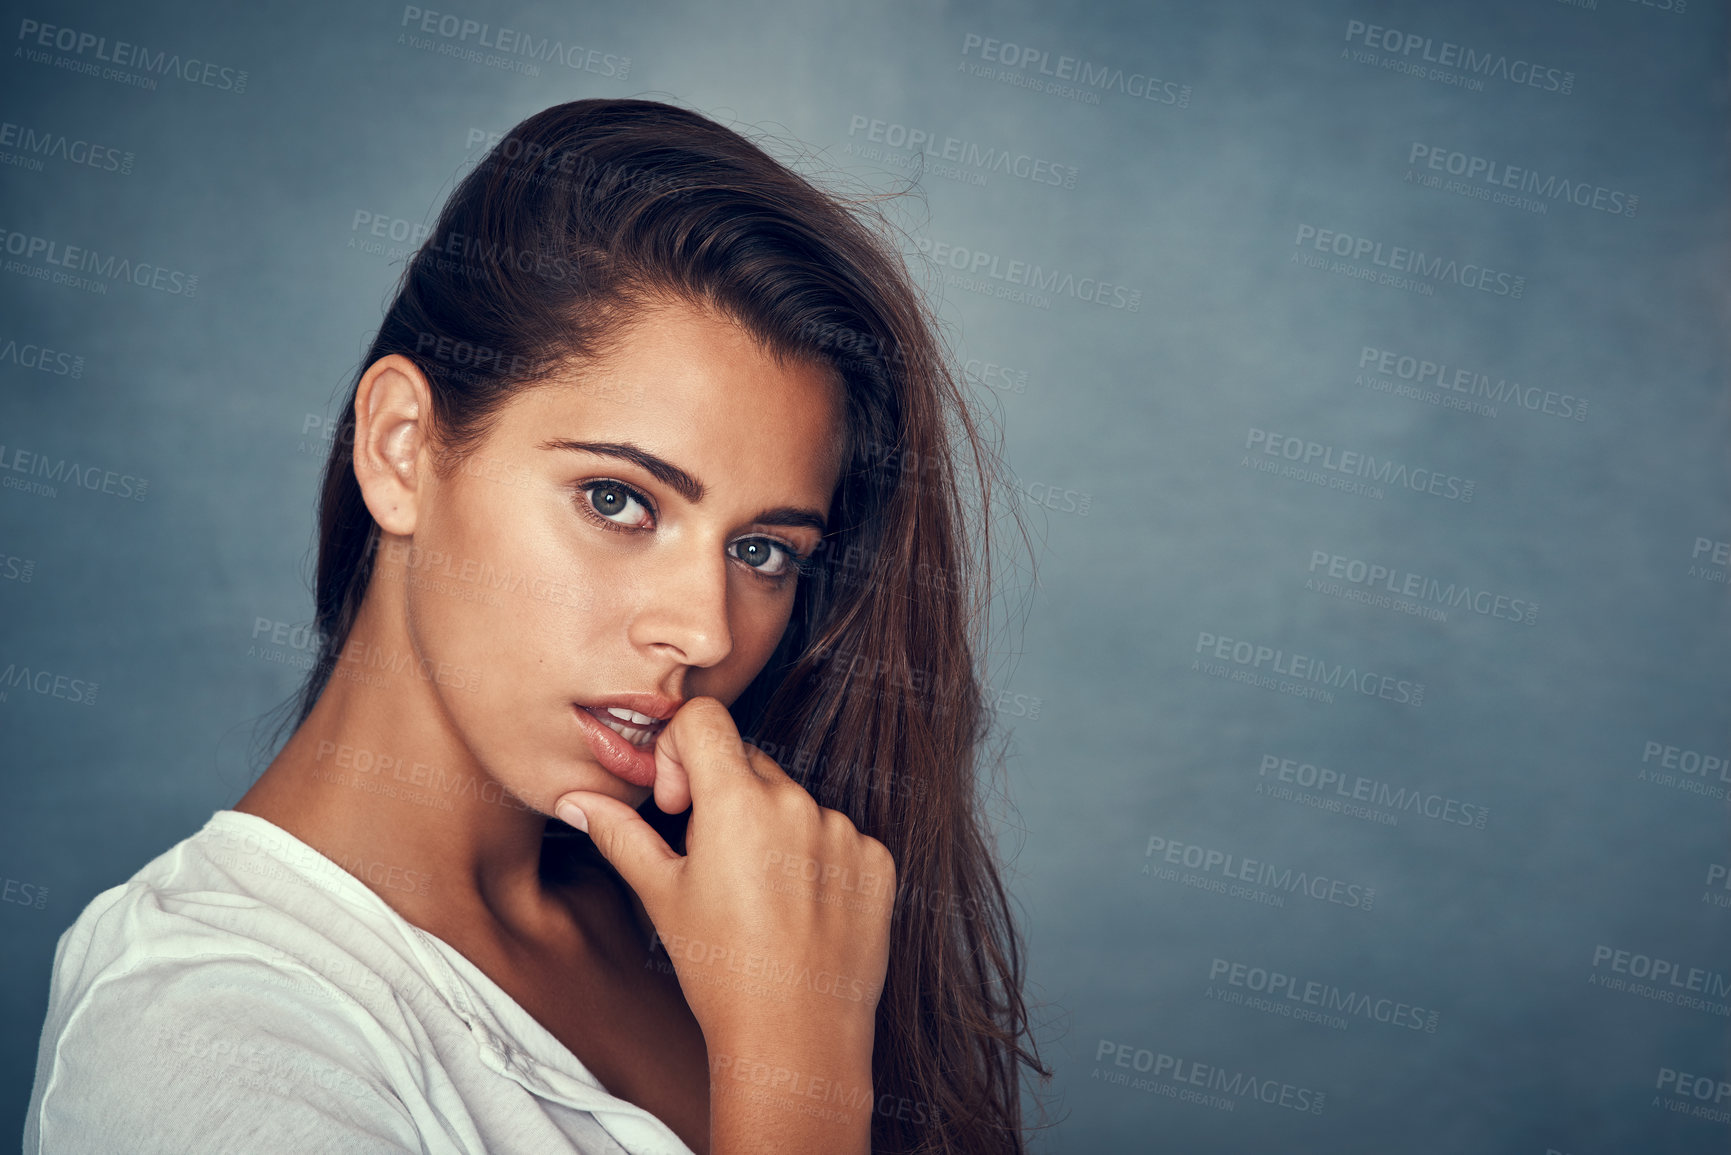 Buy stock photo Portrait of a beautiful young woman posing against a gray background in studio